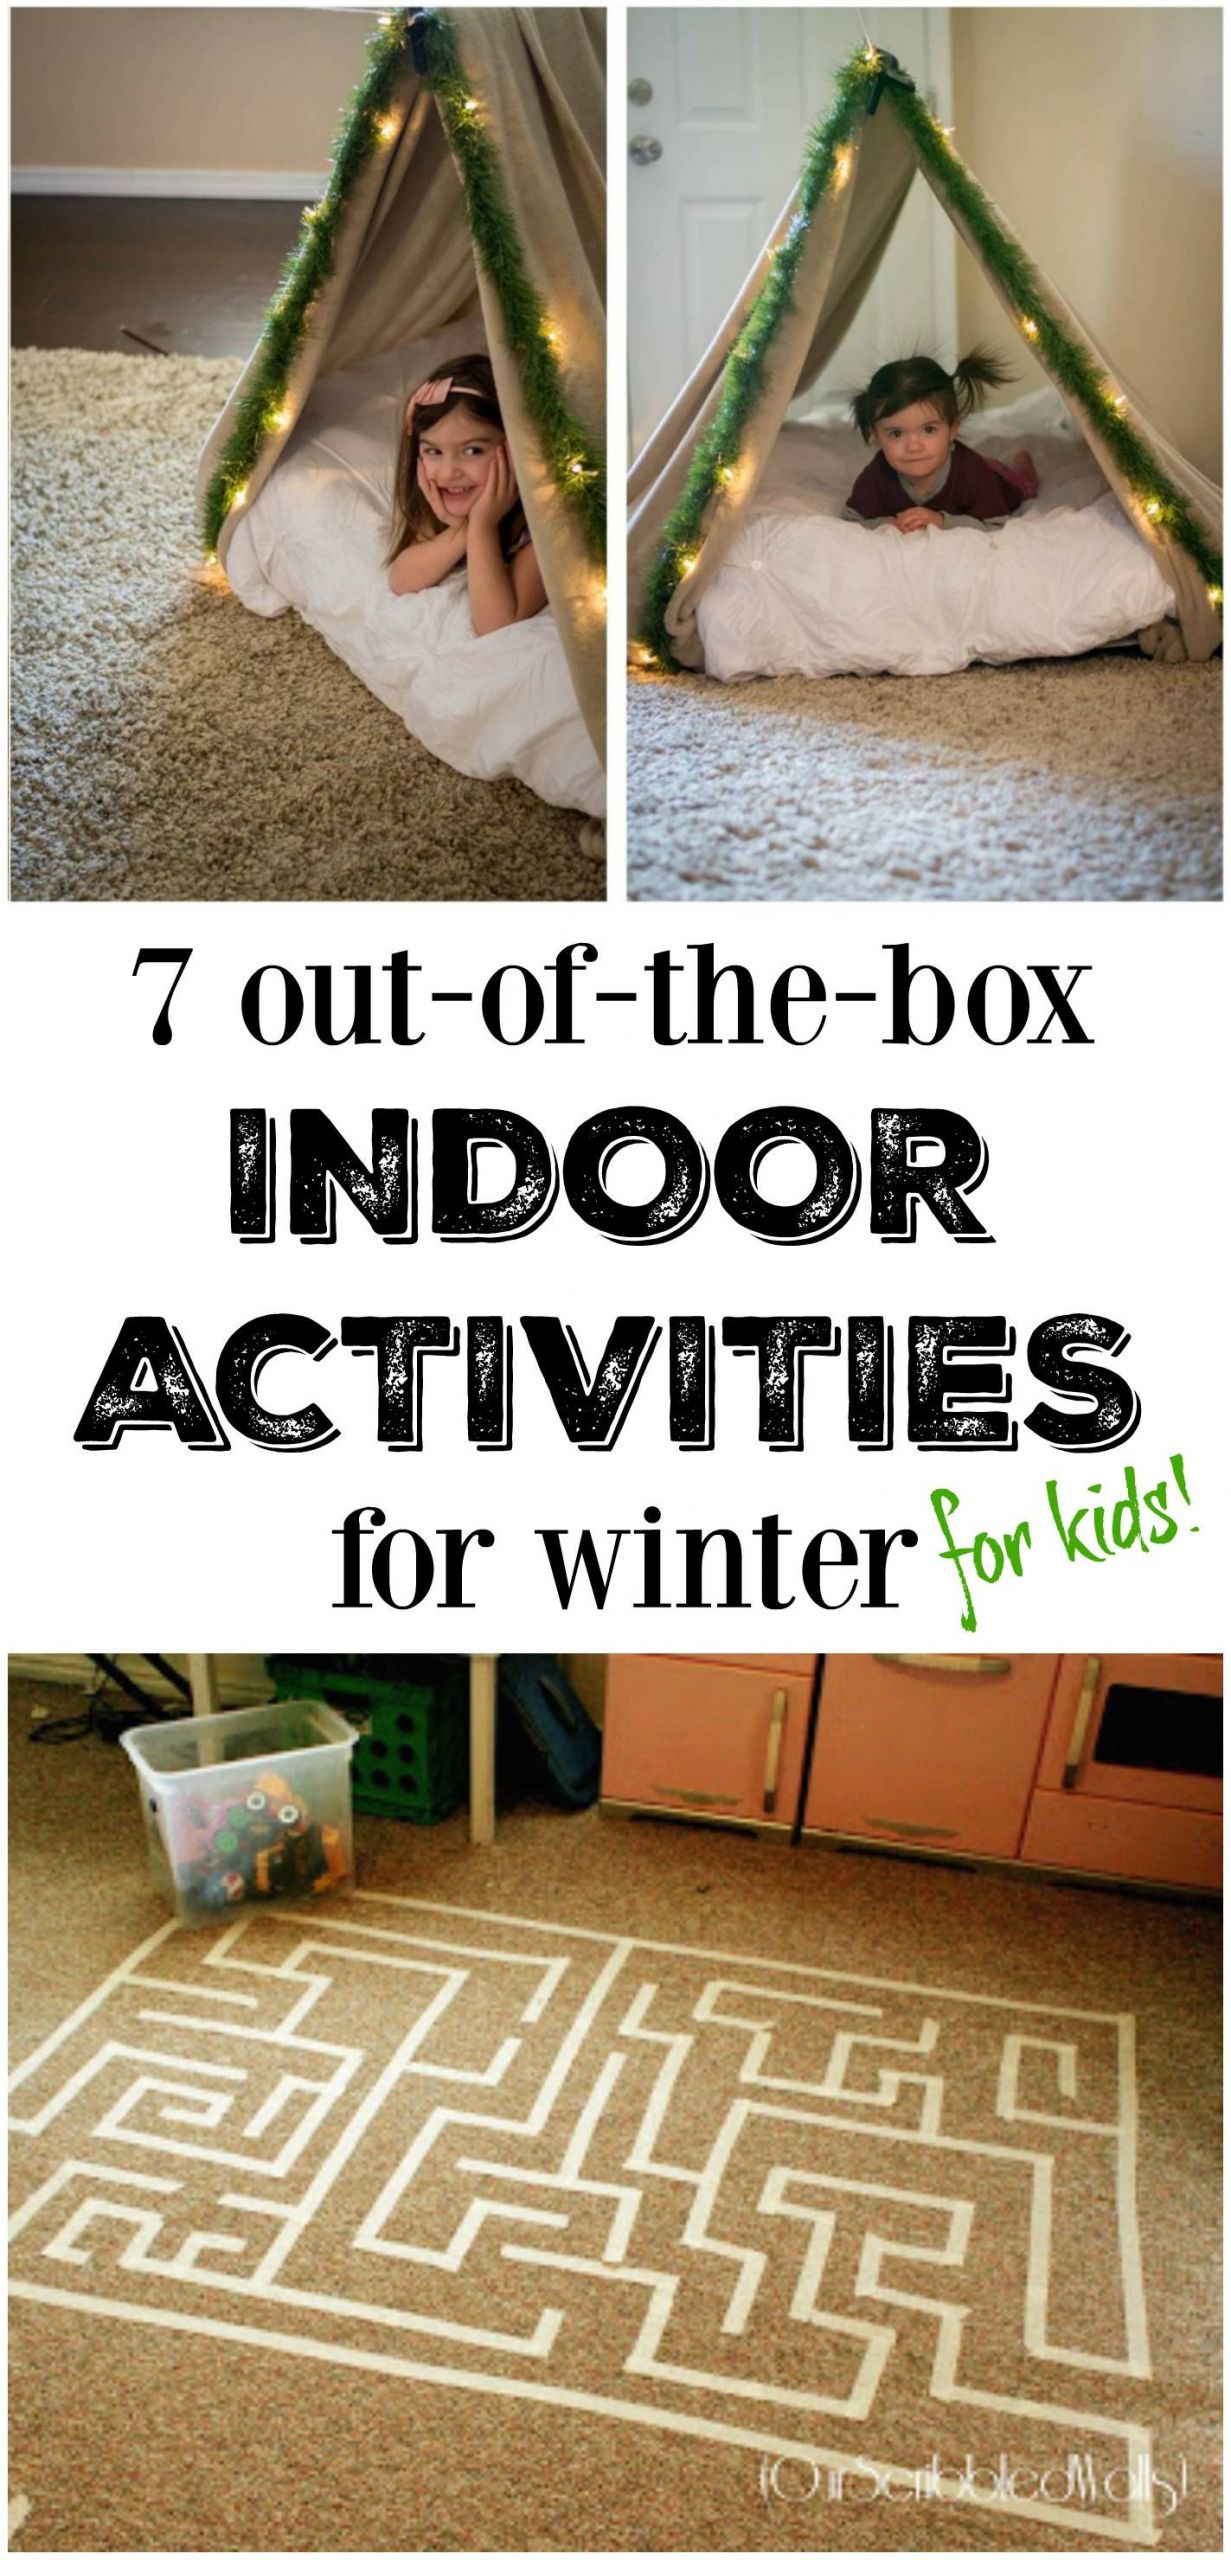 Indoor Winter Activities For Toddlers
 7 Out of the box Indoor Winter Activities for Kids